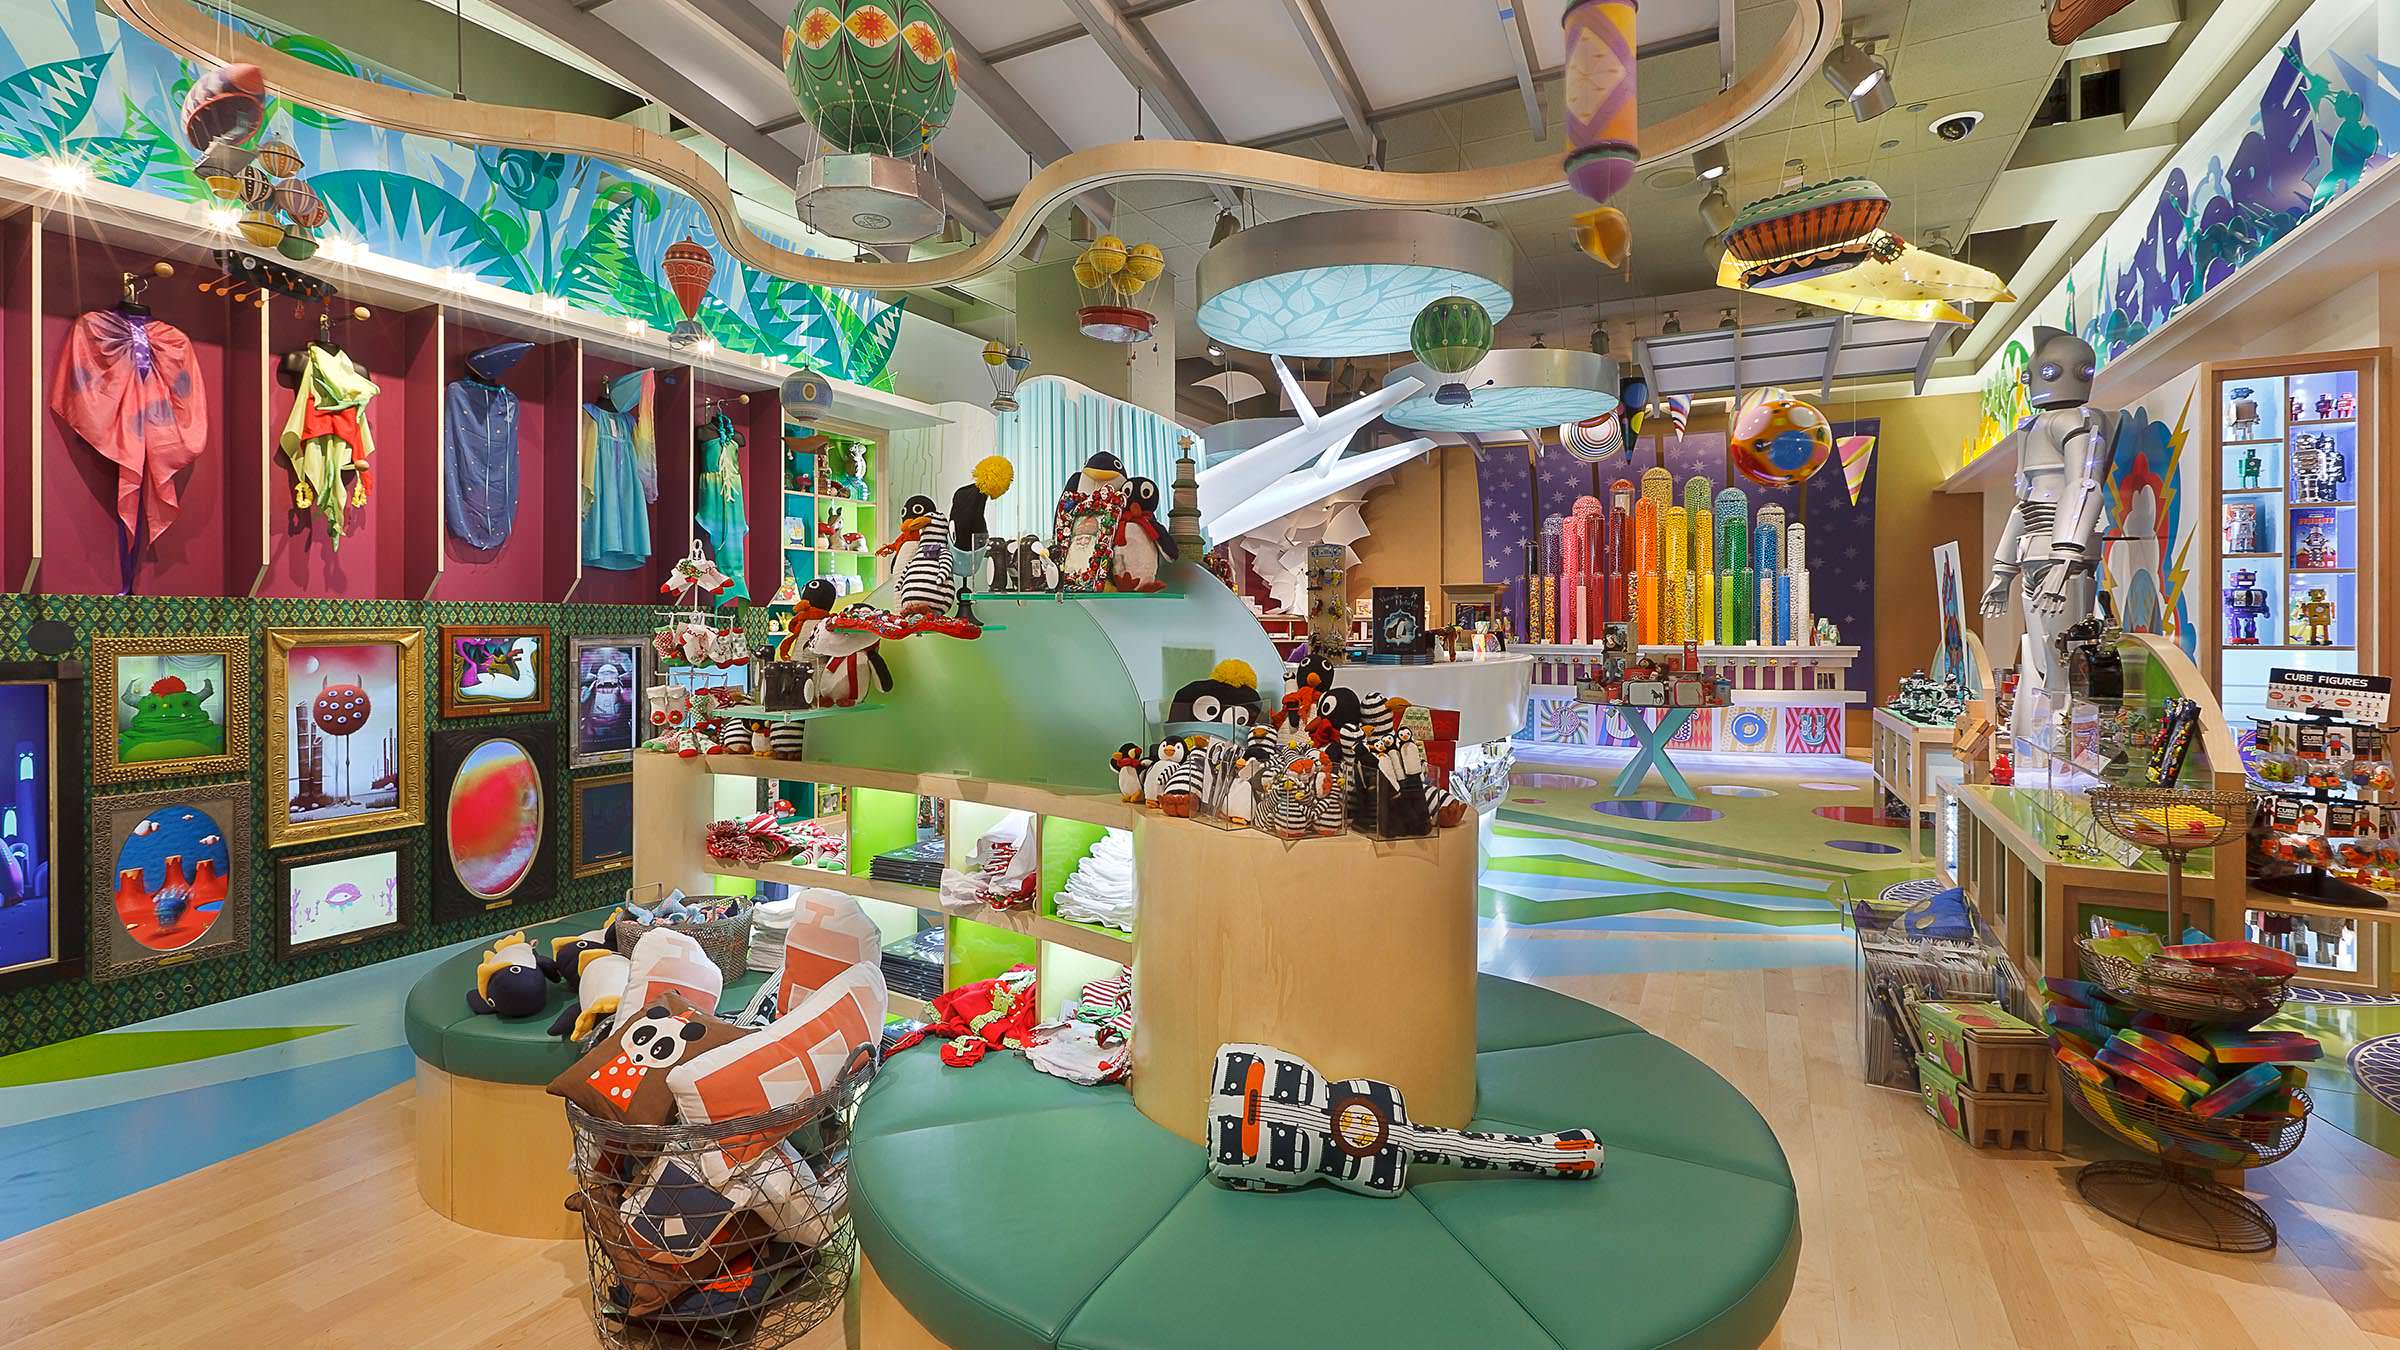 Grand America Hotel's JouJou Toy Store with stuffed toys, games, and children's costumes.